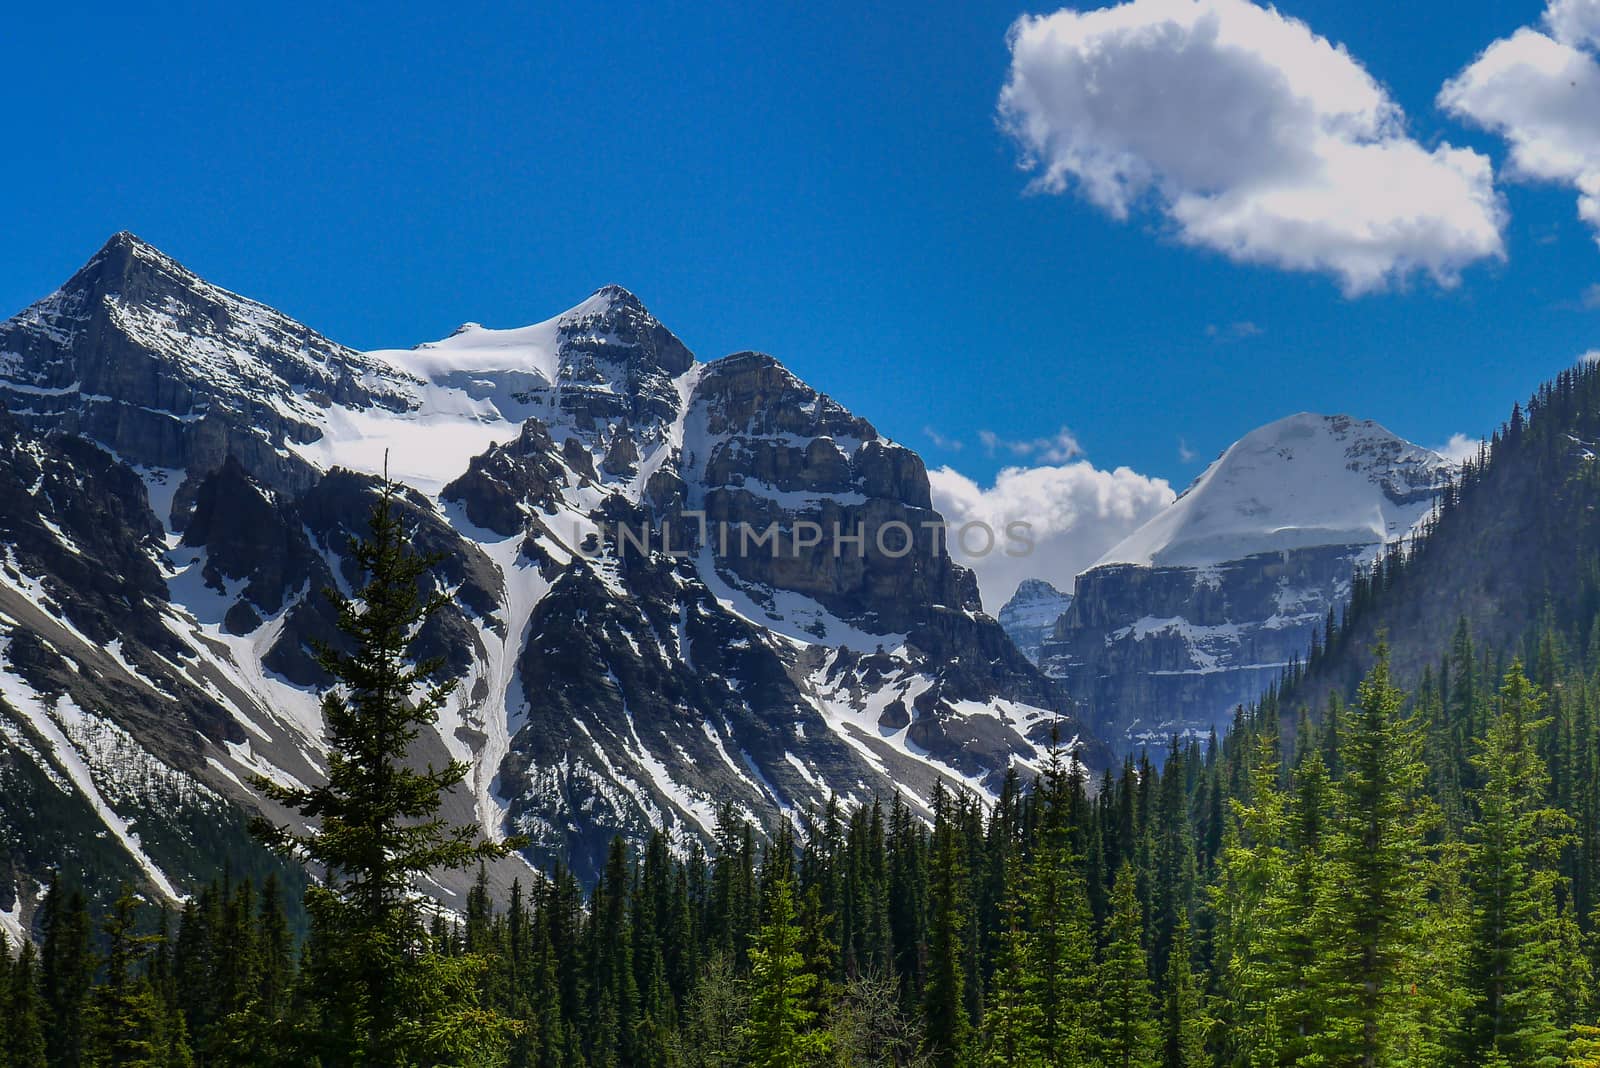 The peaks of the mountains around Lake Louise by chrisukphoto